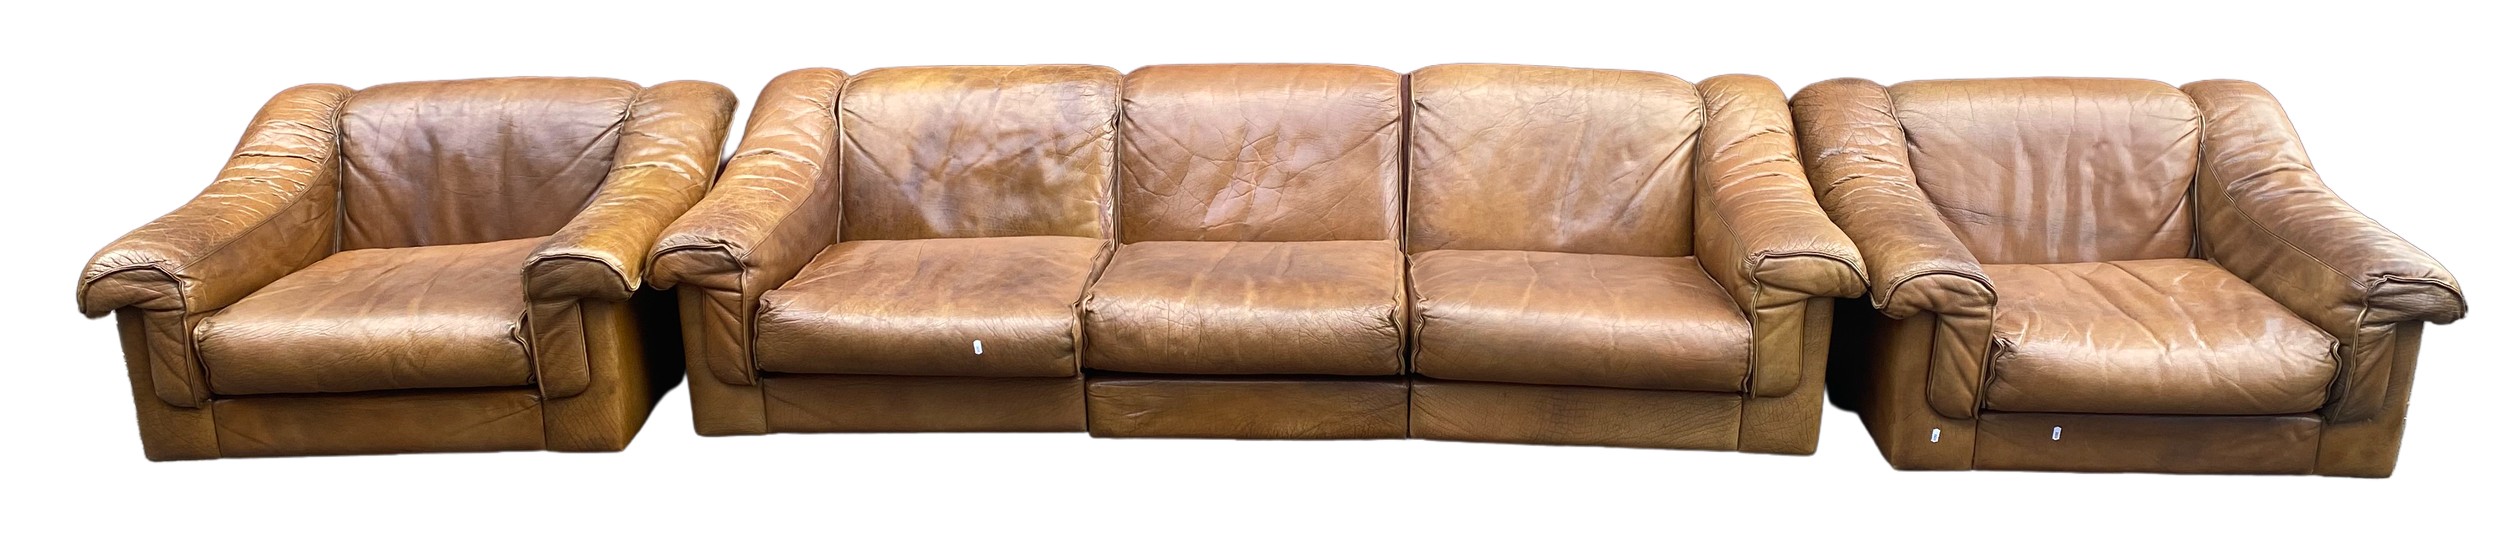 A mid 20th century retro leather suite by Vatne Mobler consisting of a three seater sofa and two